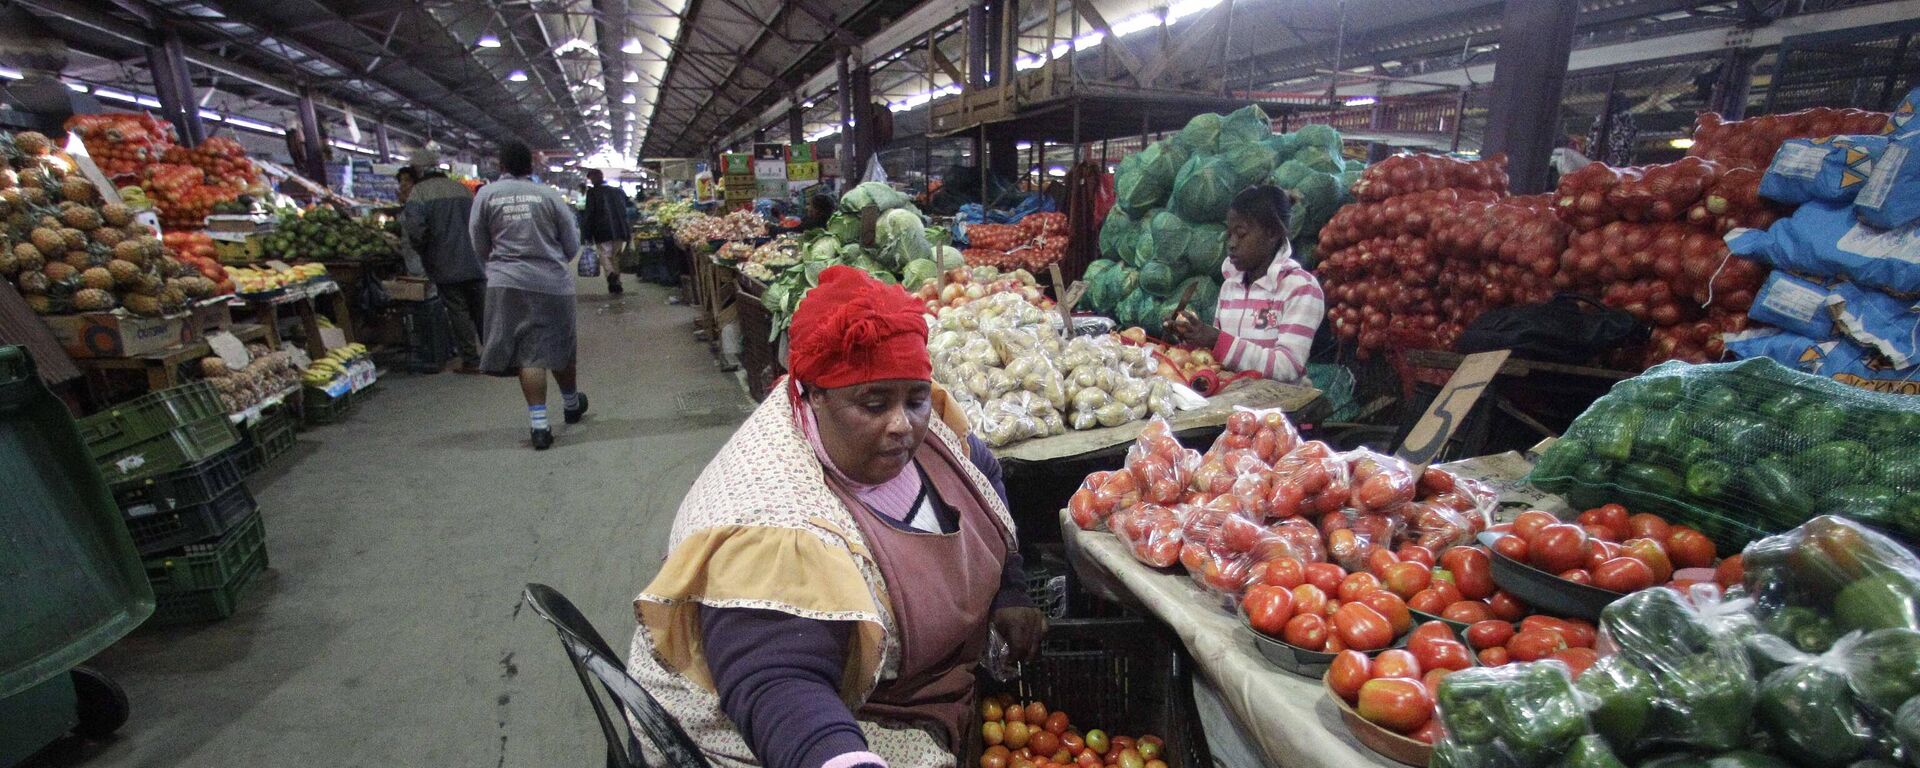 A woman sells vegetables at the early morning market Thursday, June 24, 2010, in Durban, South Africa.  - Sputnik Africa, 1920, 12.06.2023